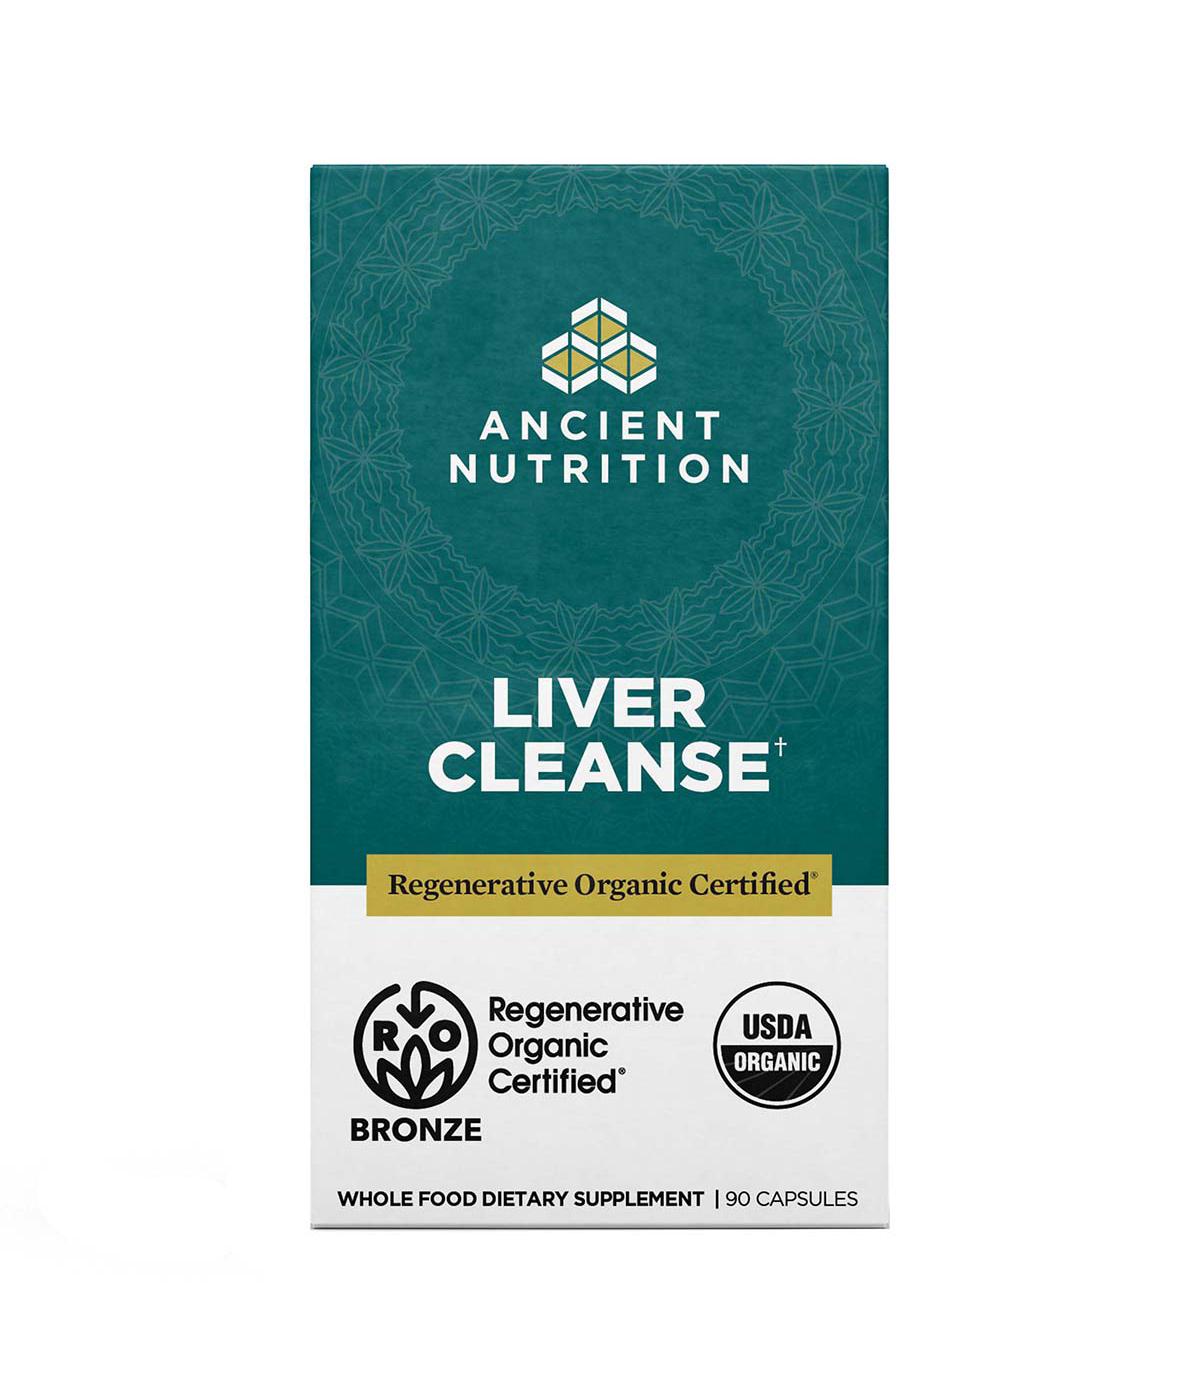 Ancient Nutrition Liver Cleanse Capsules; image 1 of 5